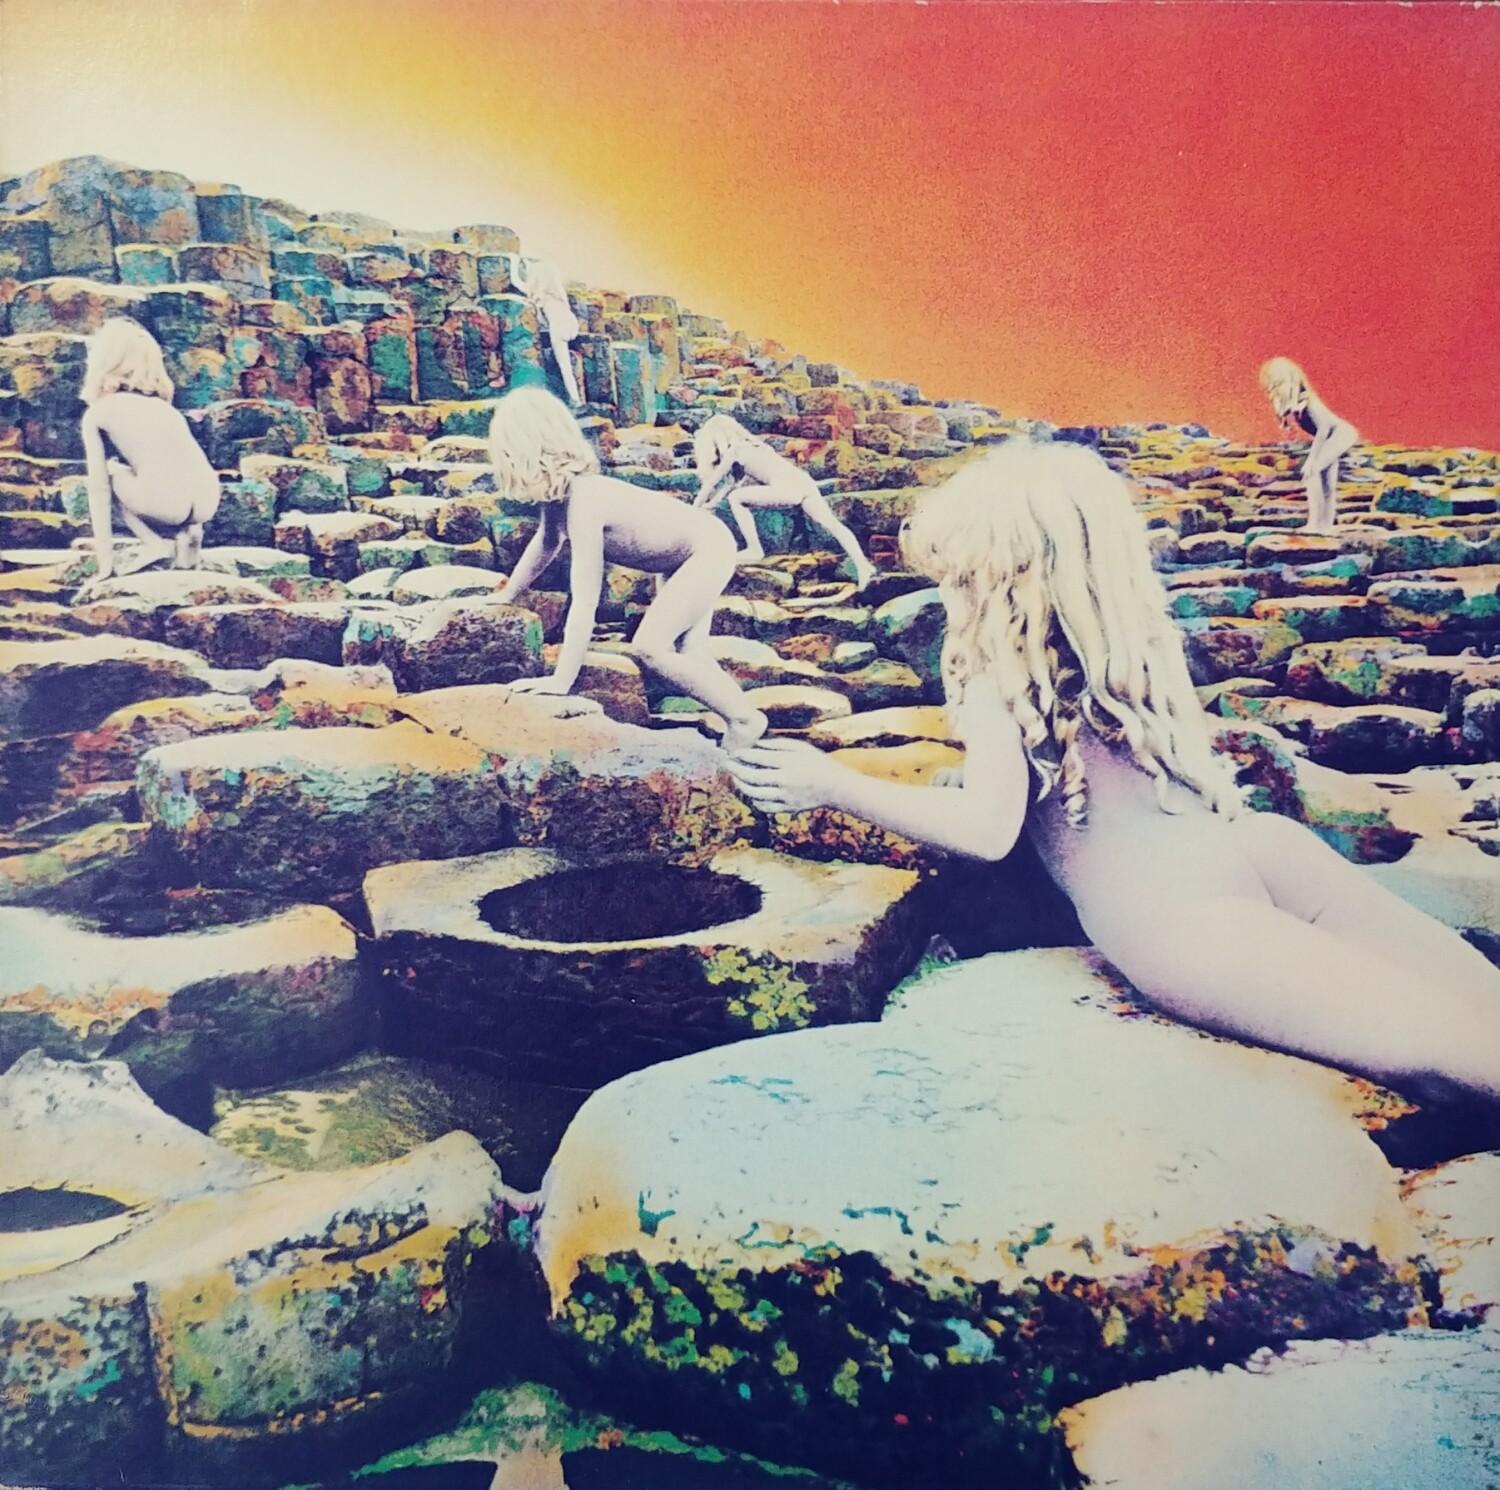 Led Zeppelin - Houses of the holy